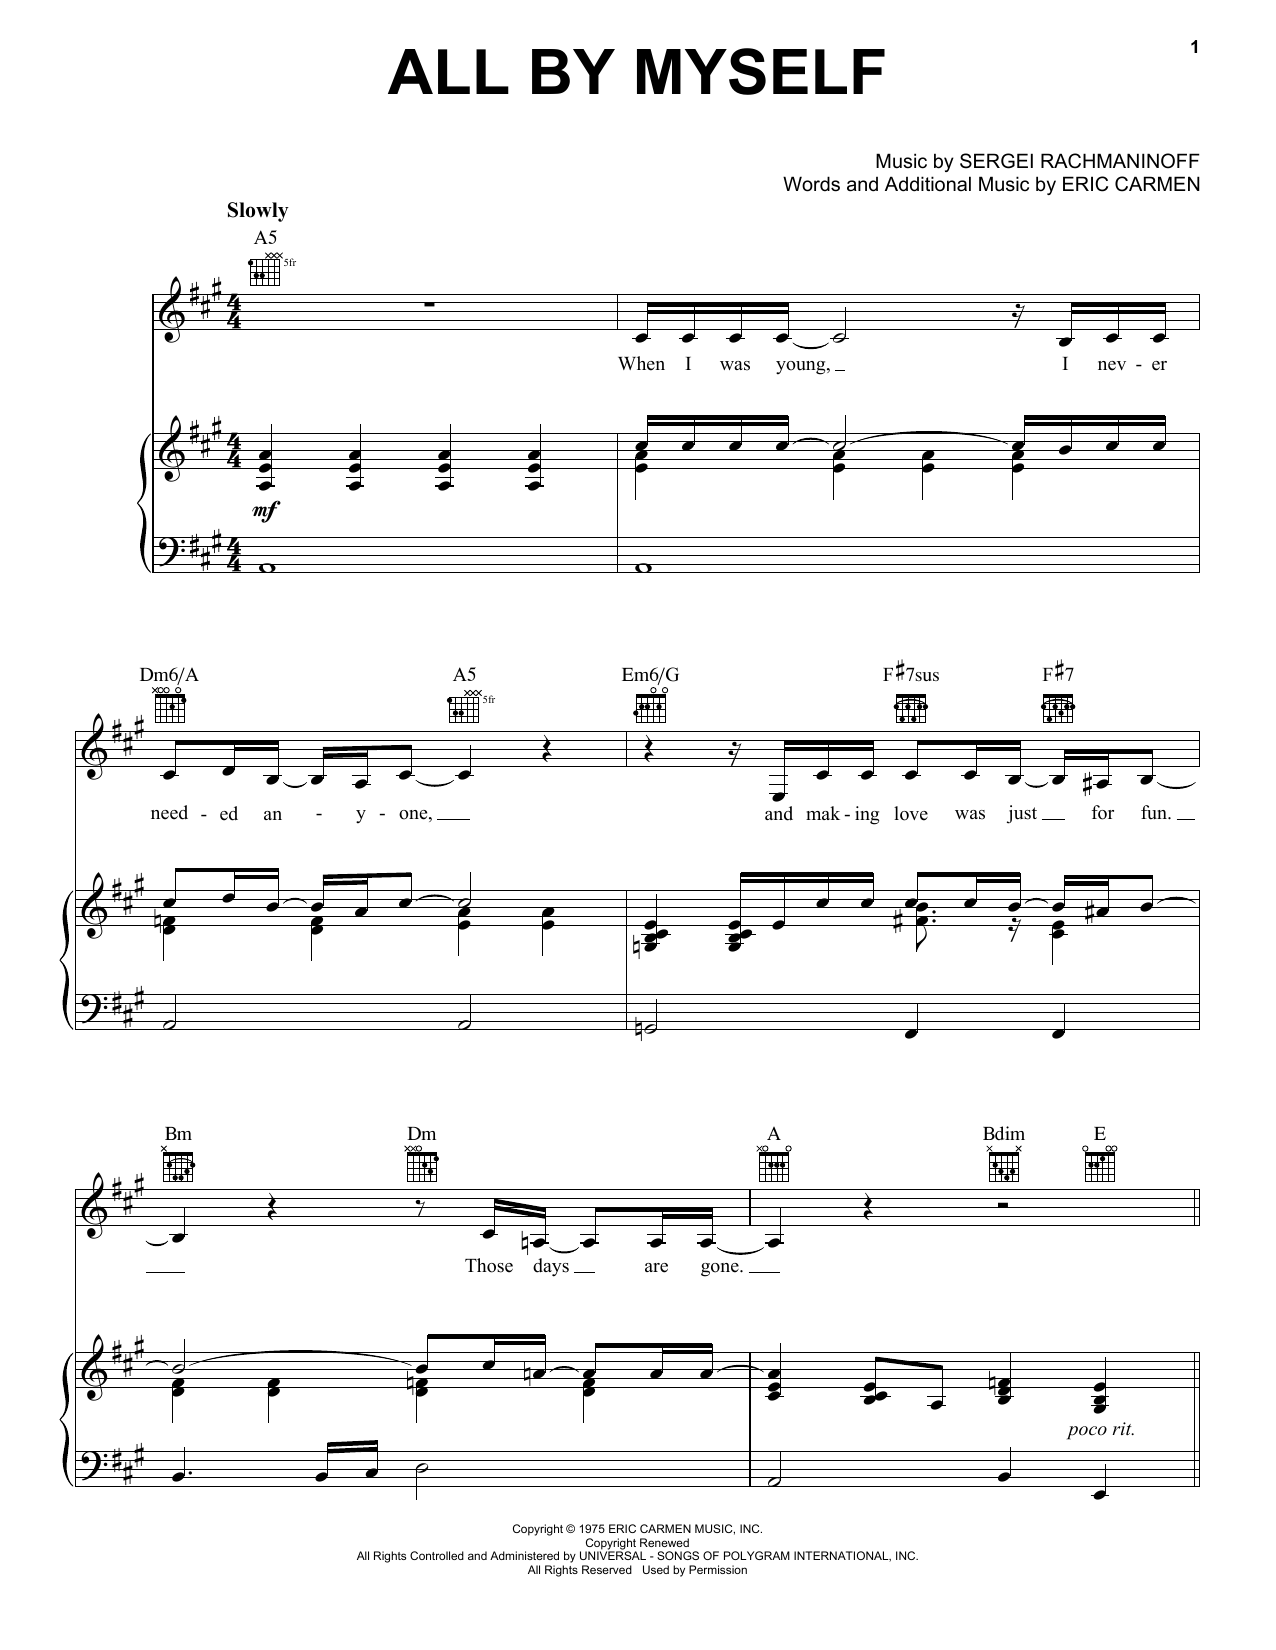 Celine Dion All By Myself sheet music notes and chords. Download Printable PDF.